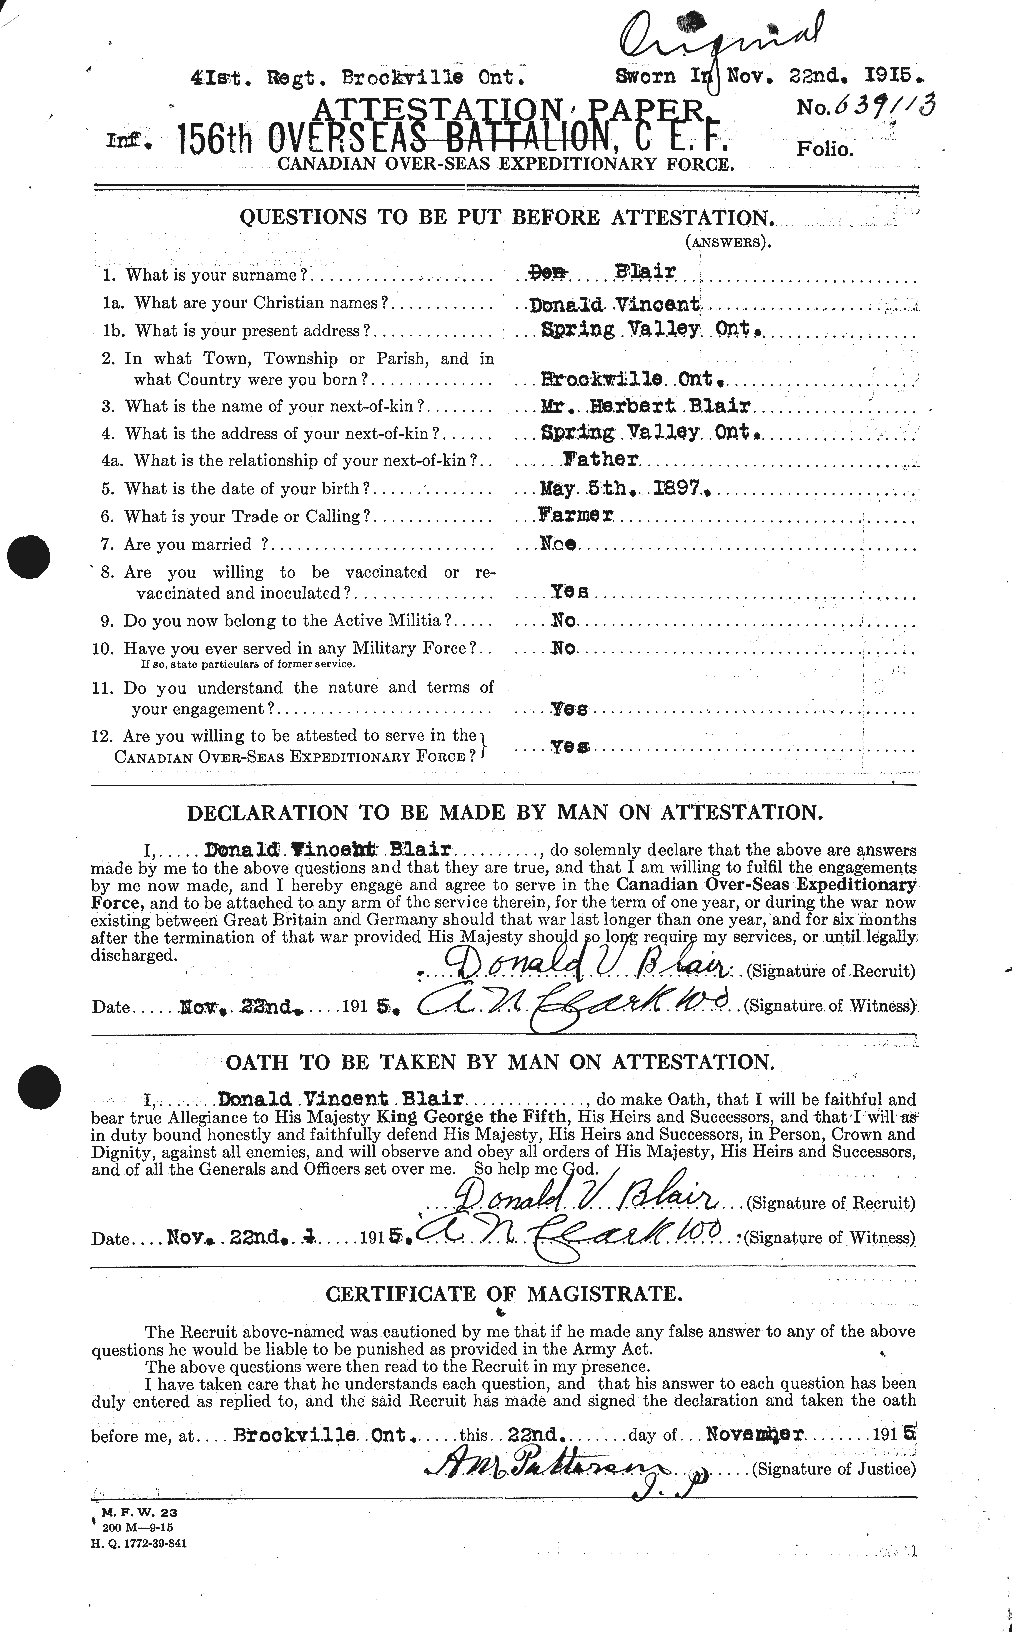 Personnel Records of the First World War - CEF 247051a